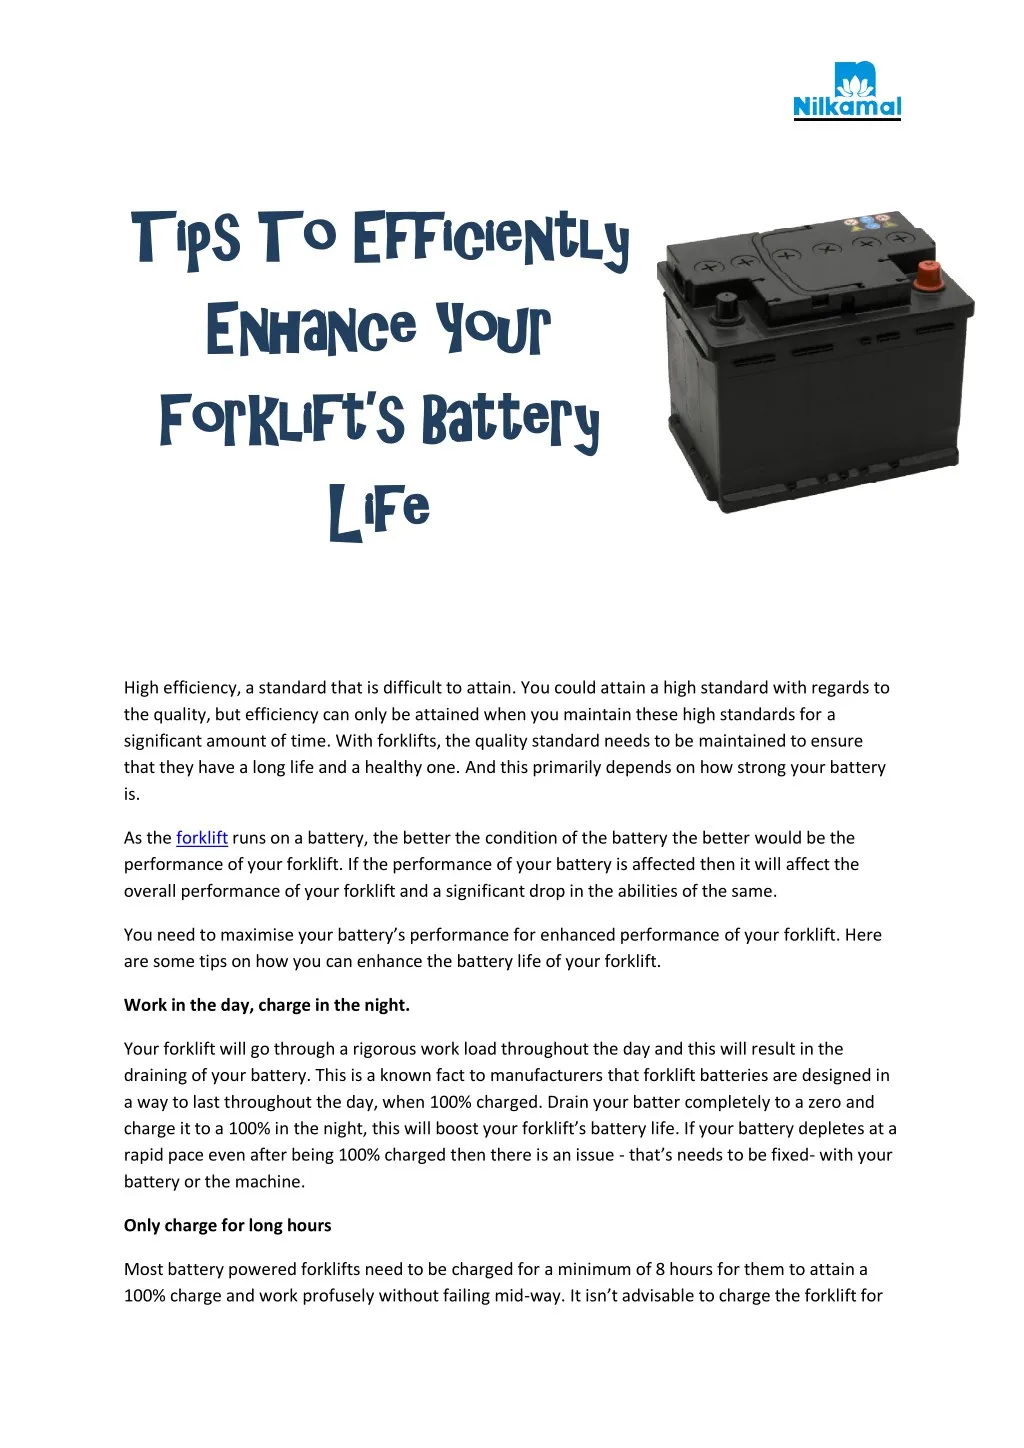 tips to efficiently enhance your forklift